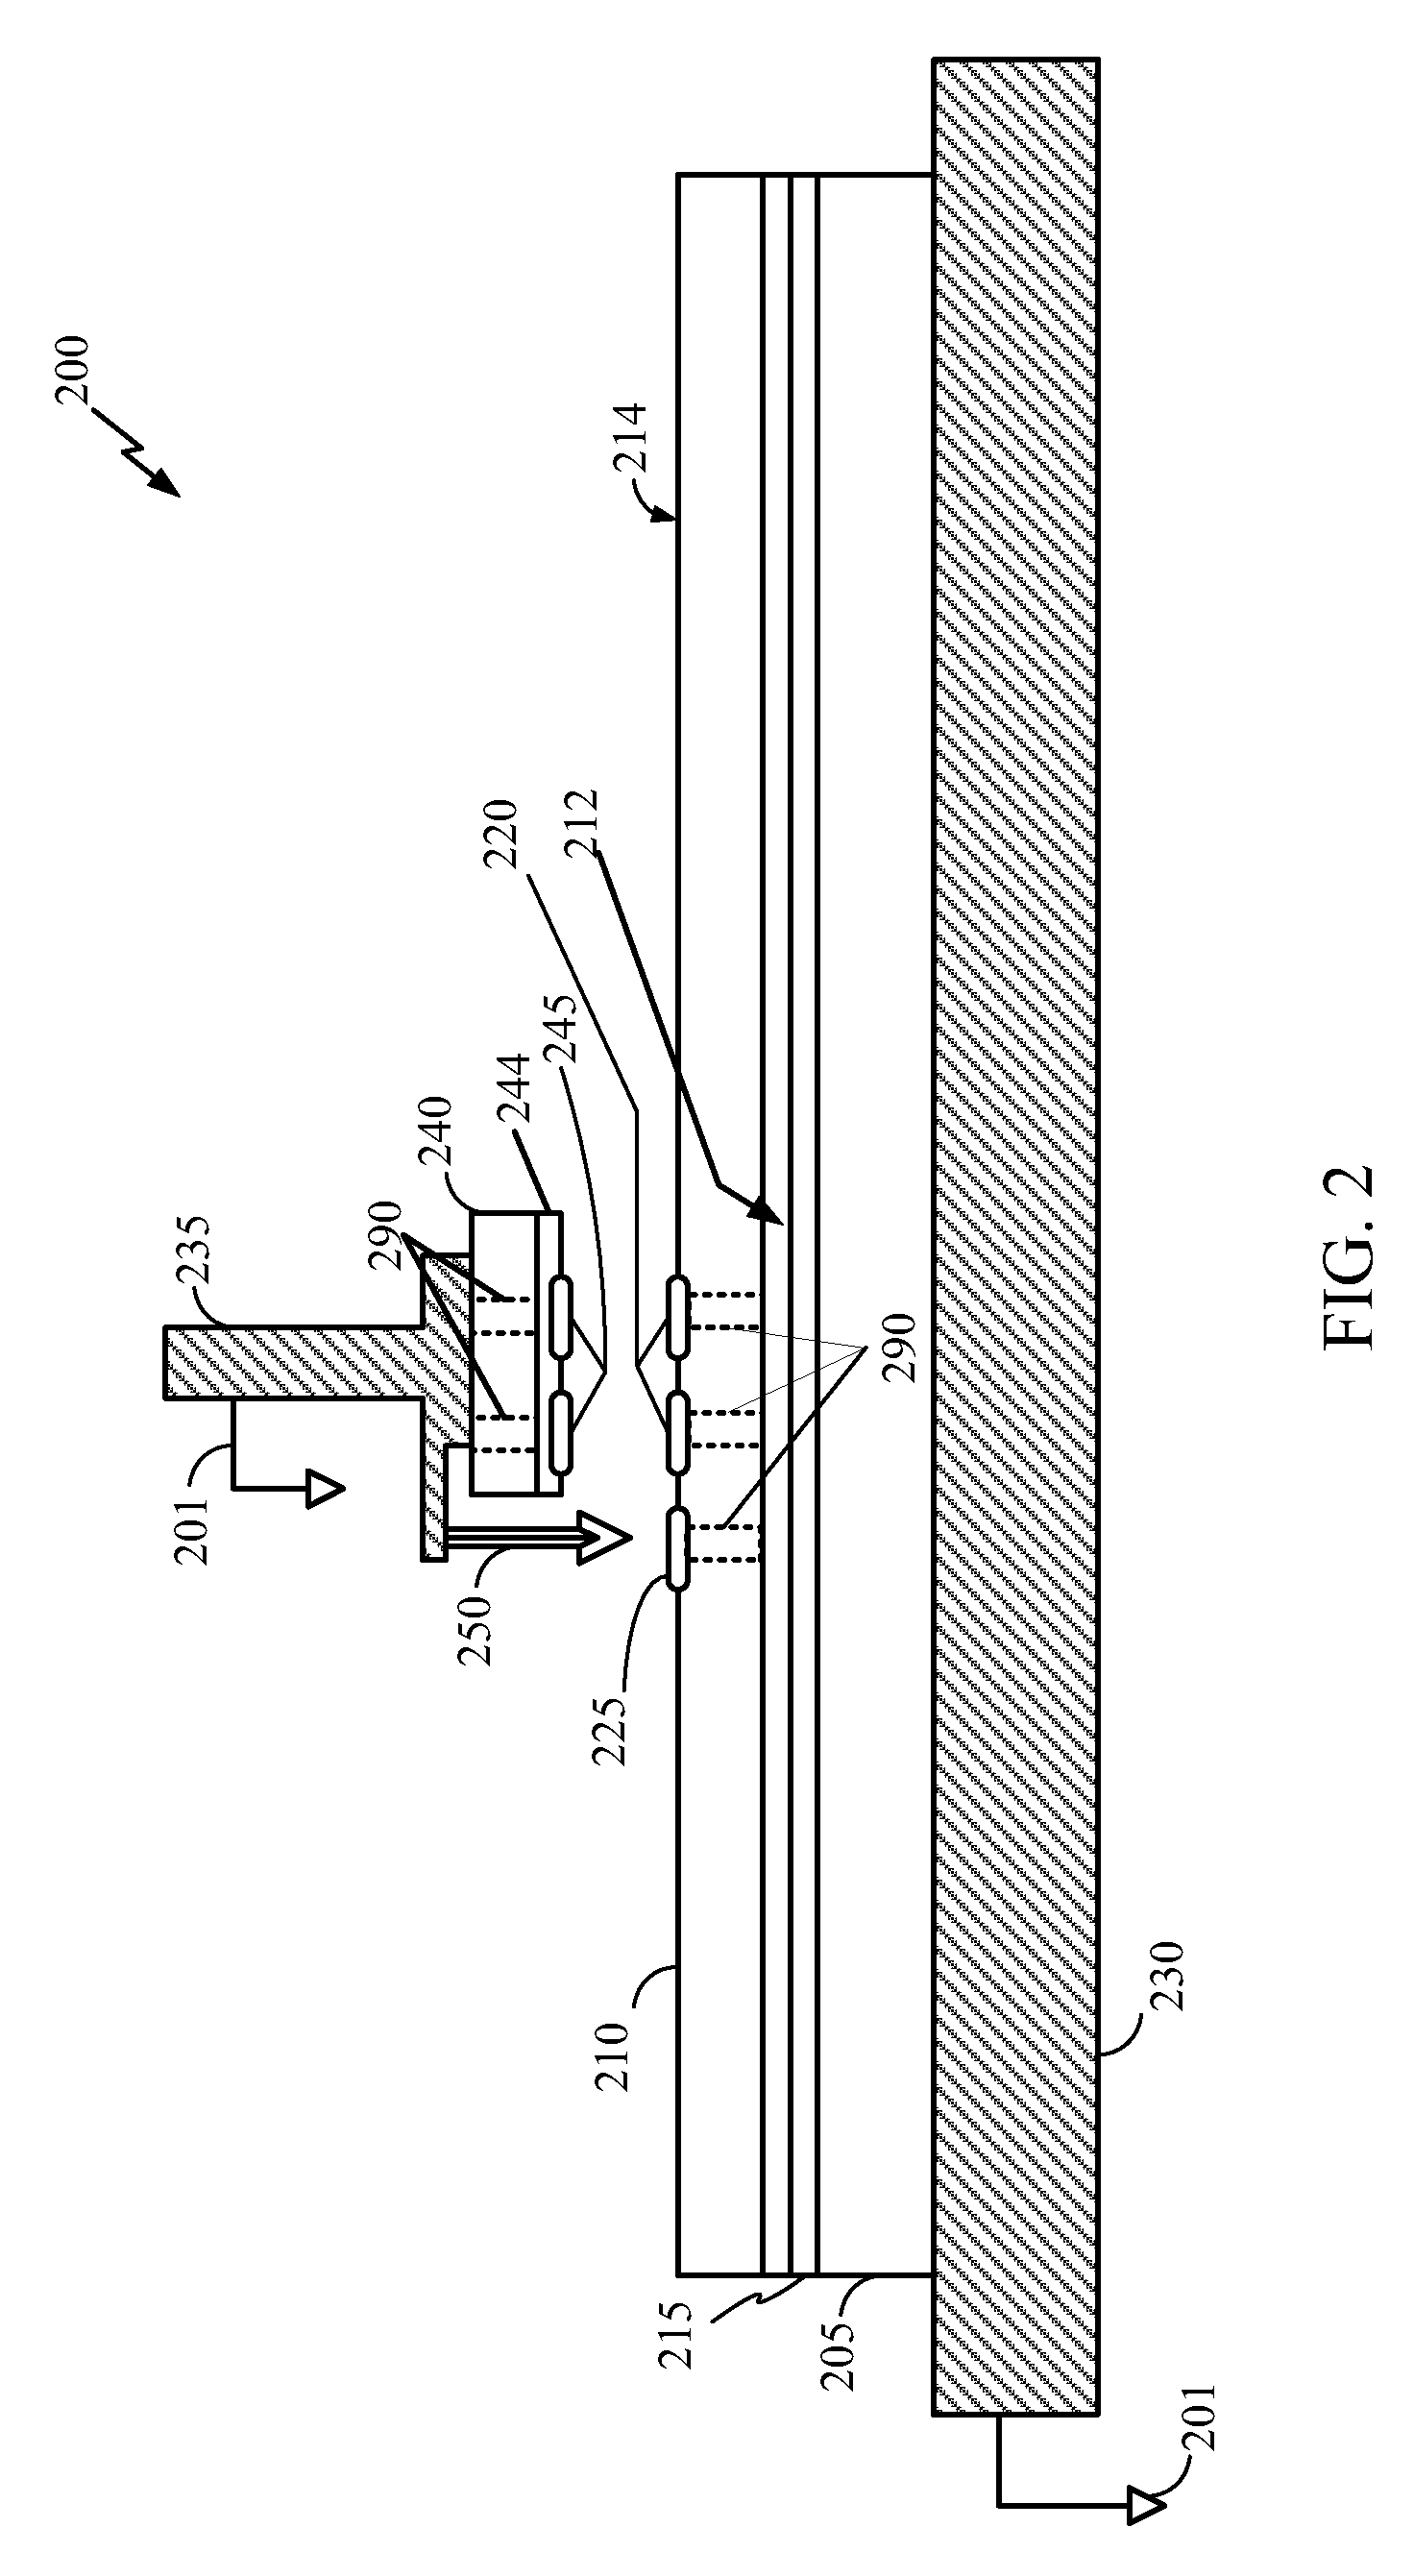 Reduced Susceptibility To Electrostatic Discharge During 3D Semiconductor Device Bonding and Assembly